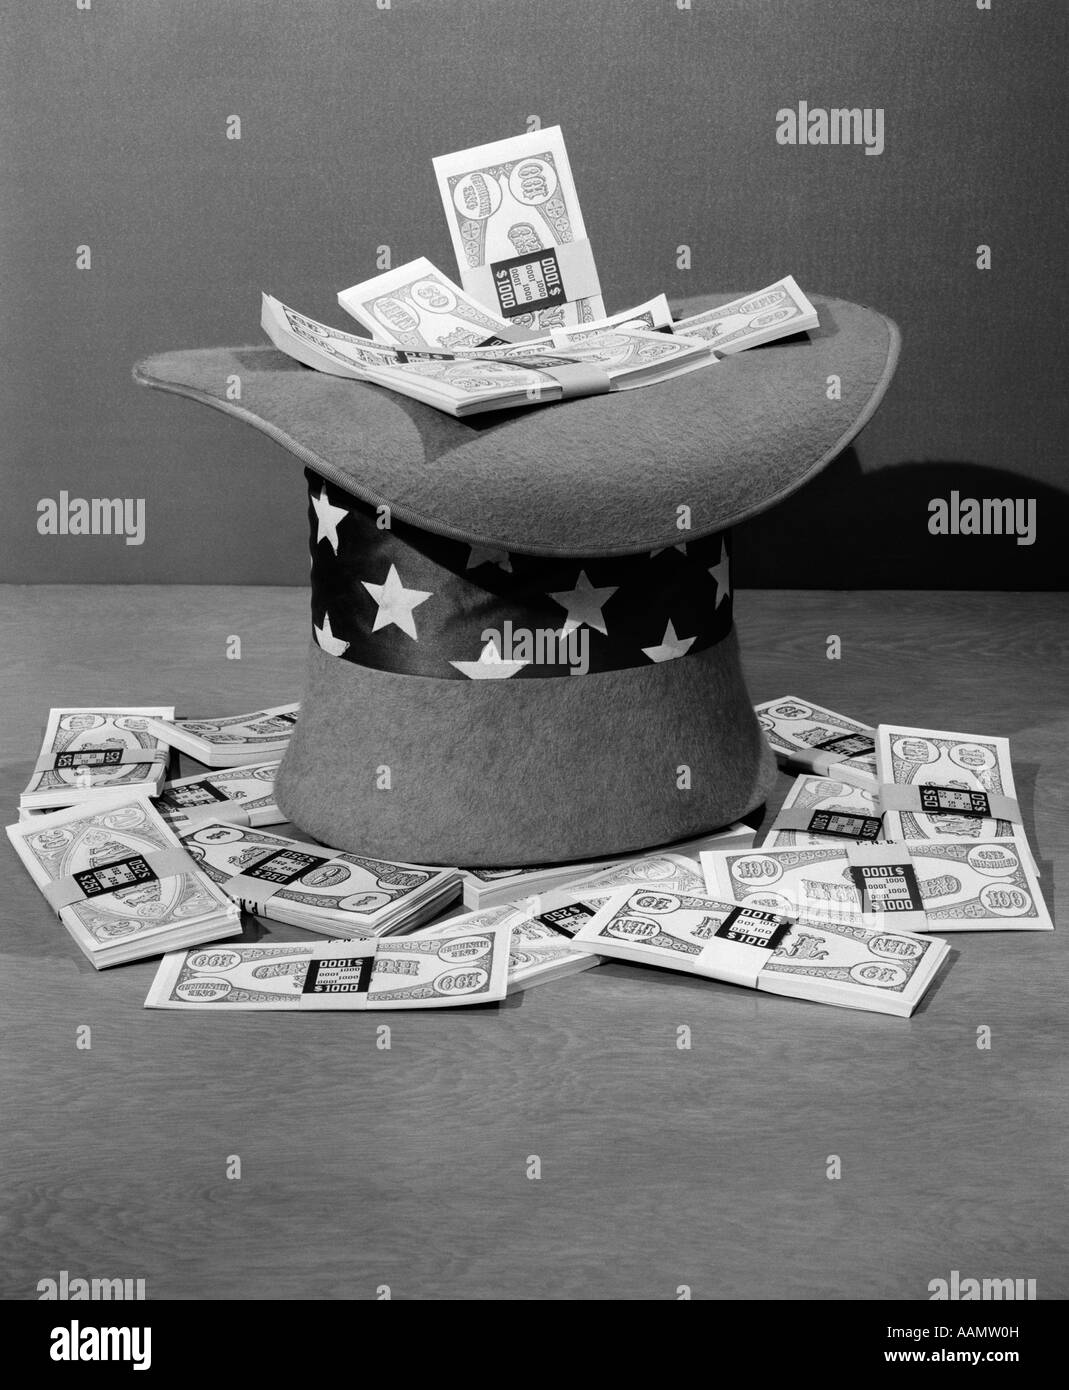 1940s SET-UP OF UPSIDE DOWN UNCLE SAM HAT FILLED WITH BUNDLES OF $100 BILLS OVERFLOWING AROUND IT Stock Photo